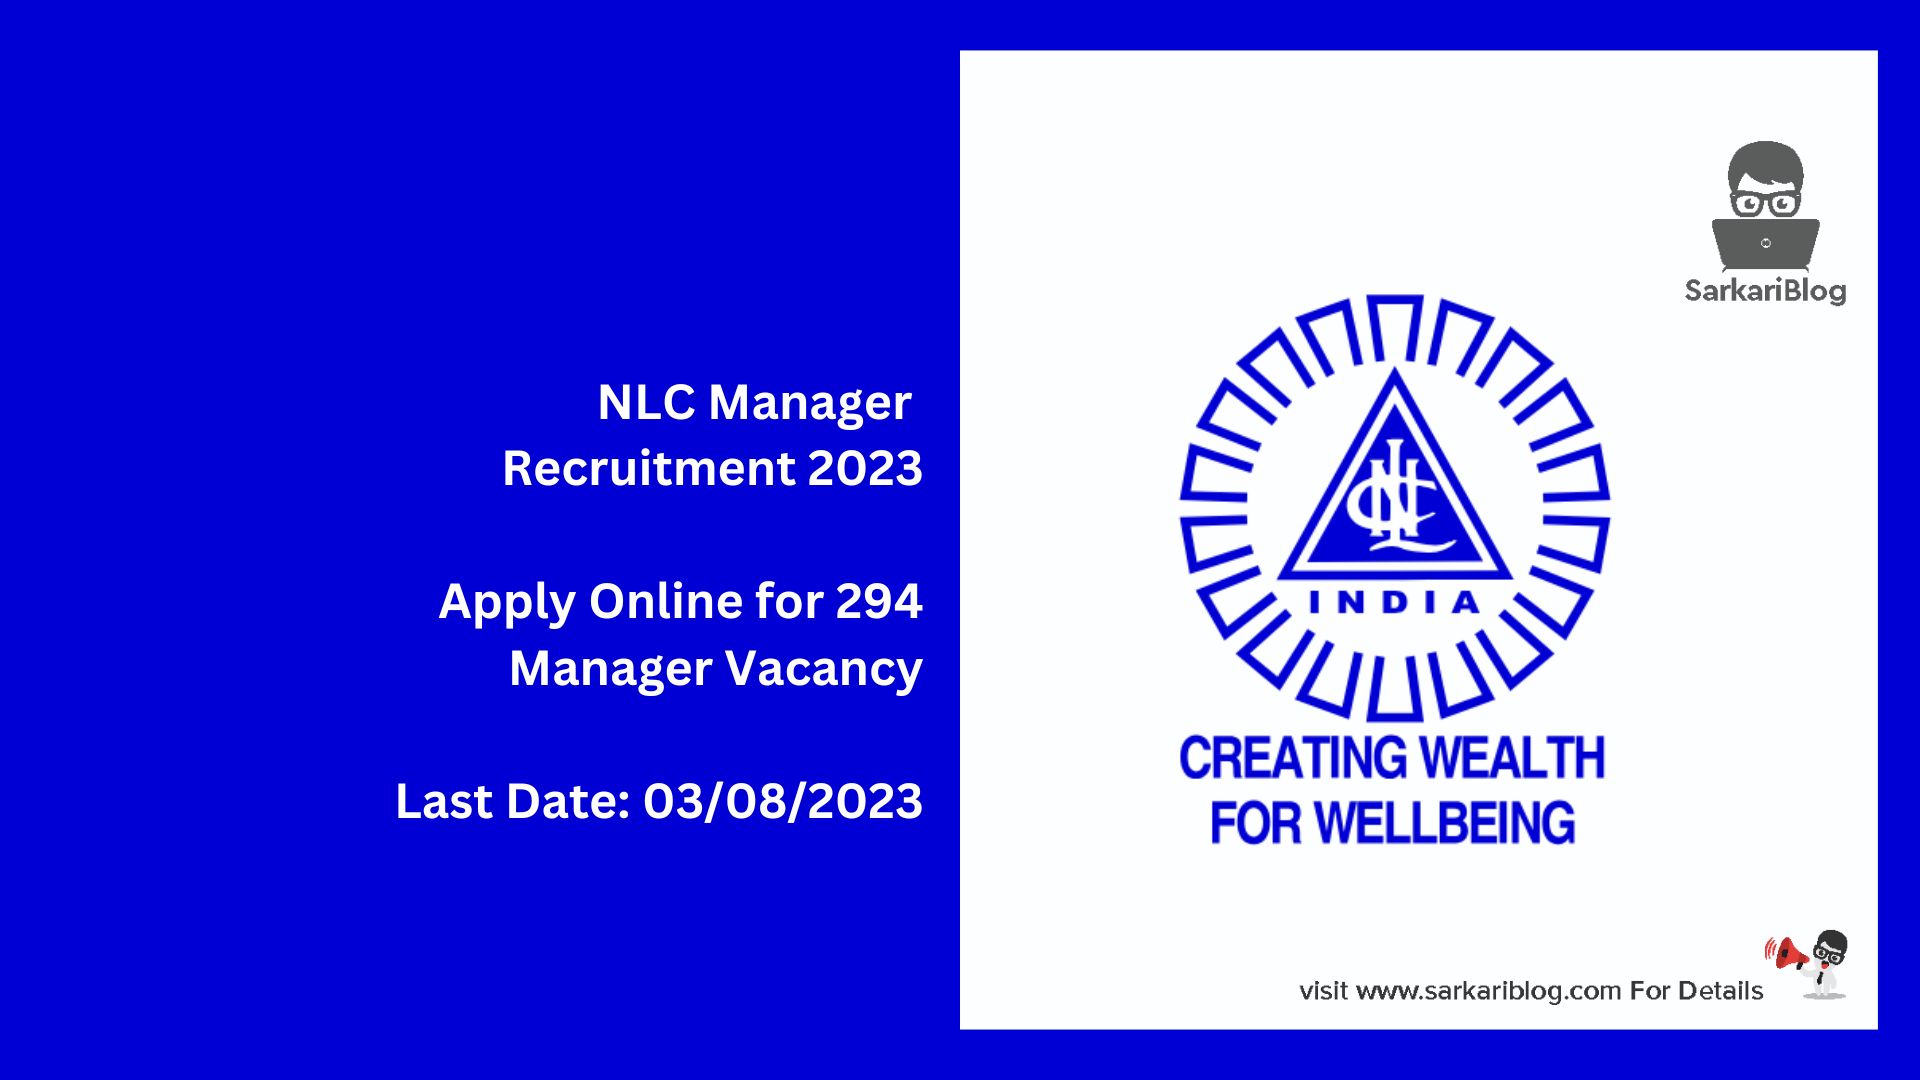 NLC Manager Recruitment 2023